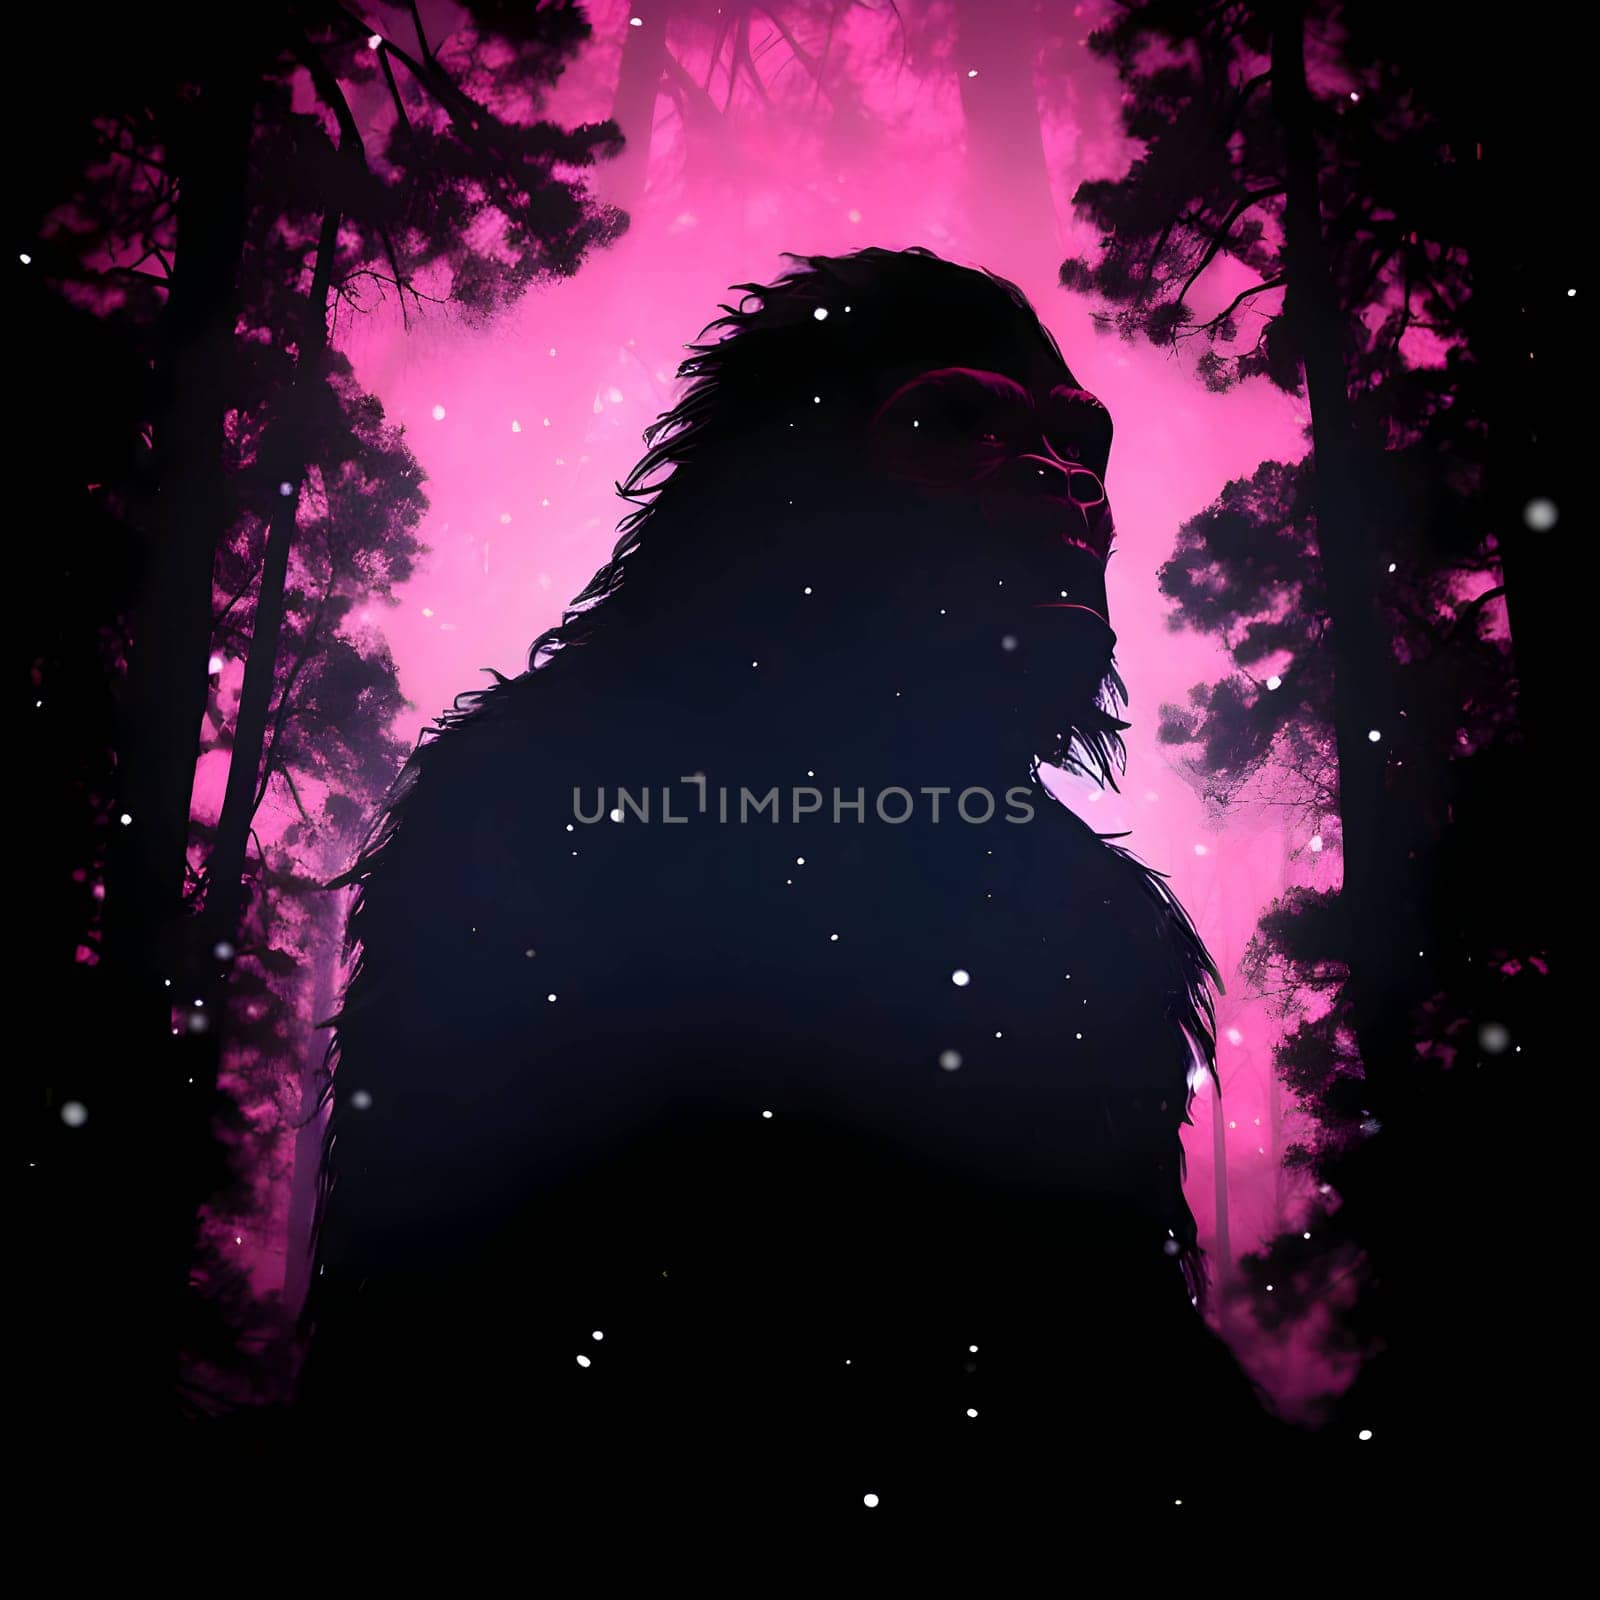 Vector illustration of a beast in black silhouette against a clean pink and black background, capturing graceful forms.